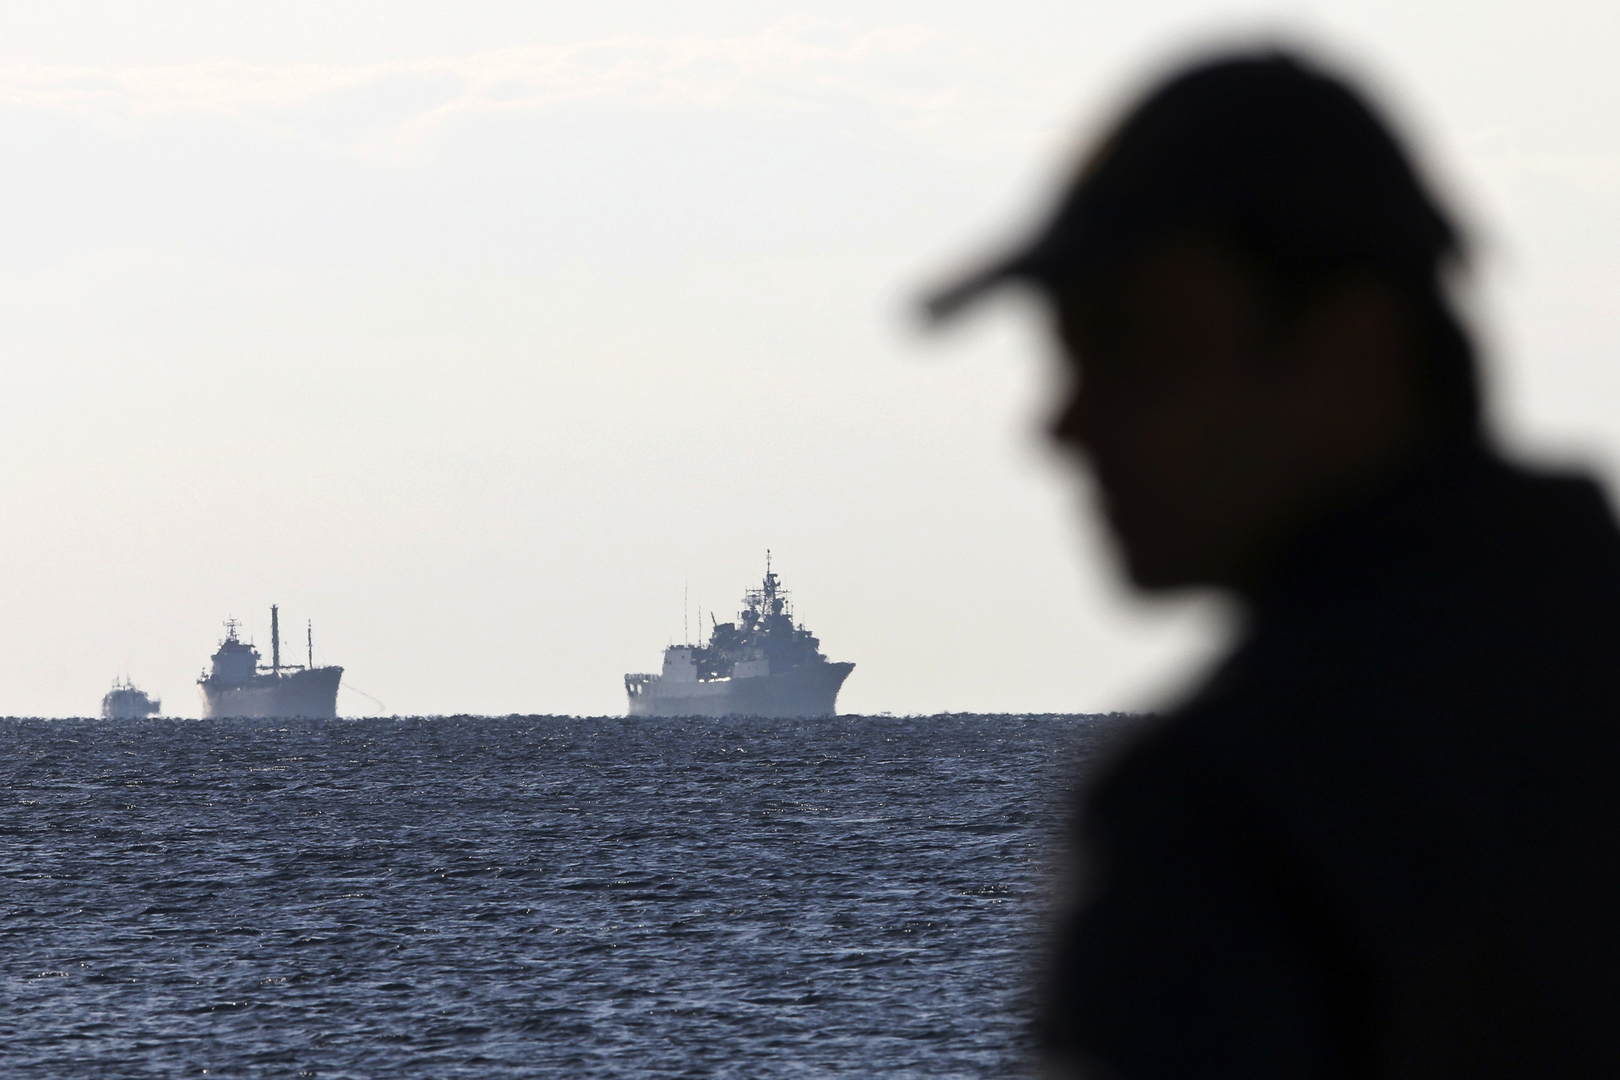 Greek media: Turkey withdrew military ships in the eastern Mediterranean after warning by greece